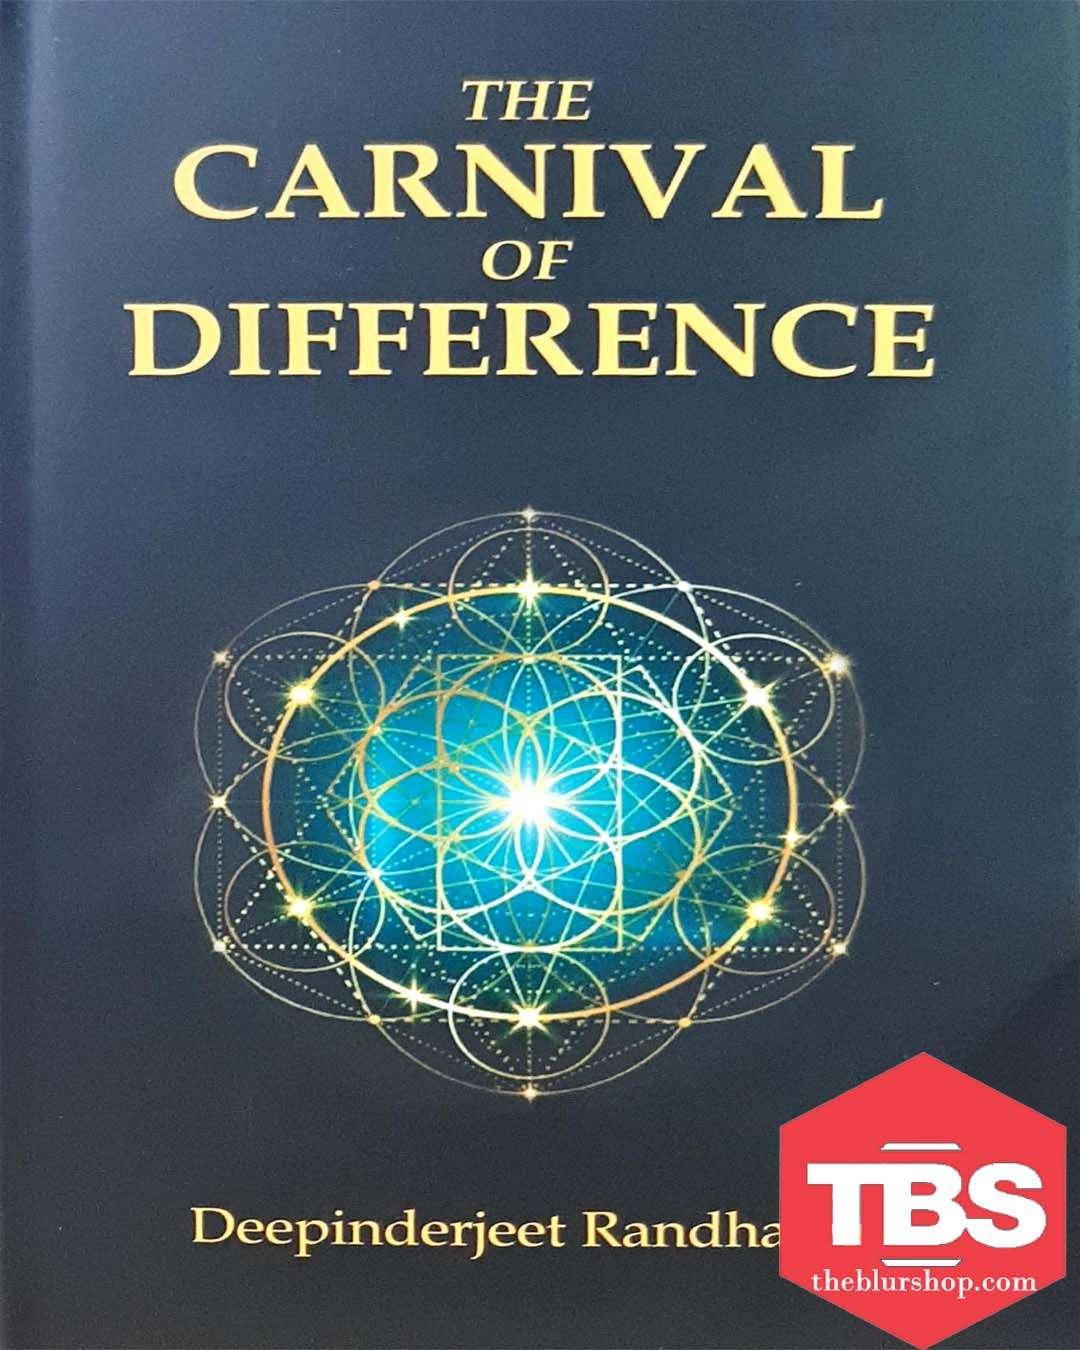 The Carnival of Difference